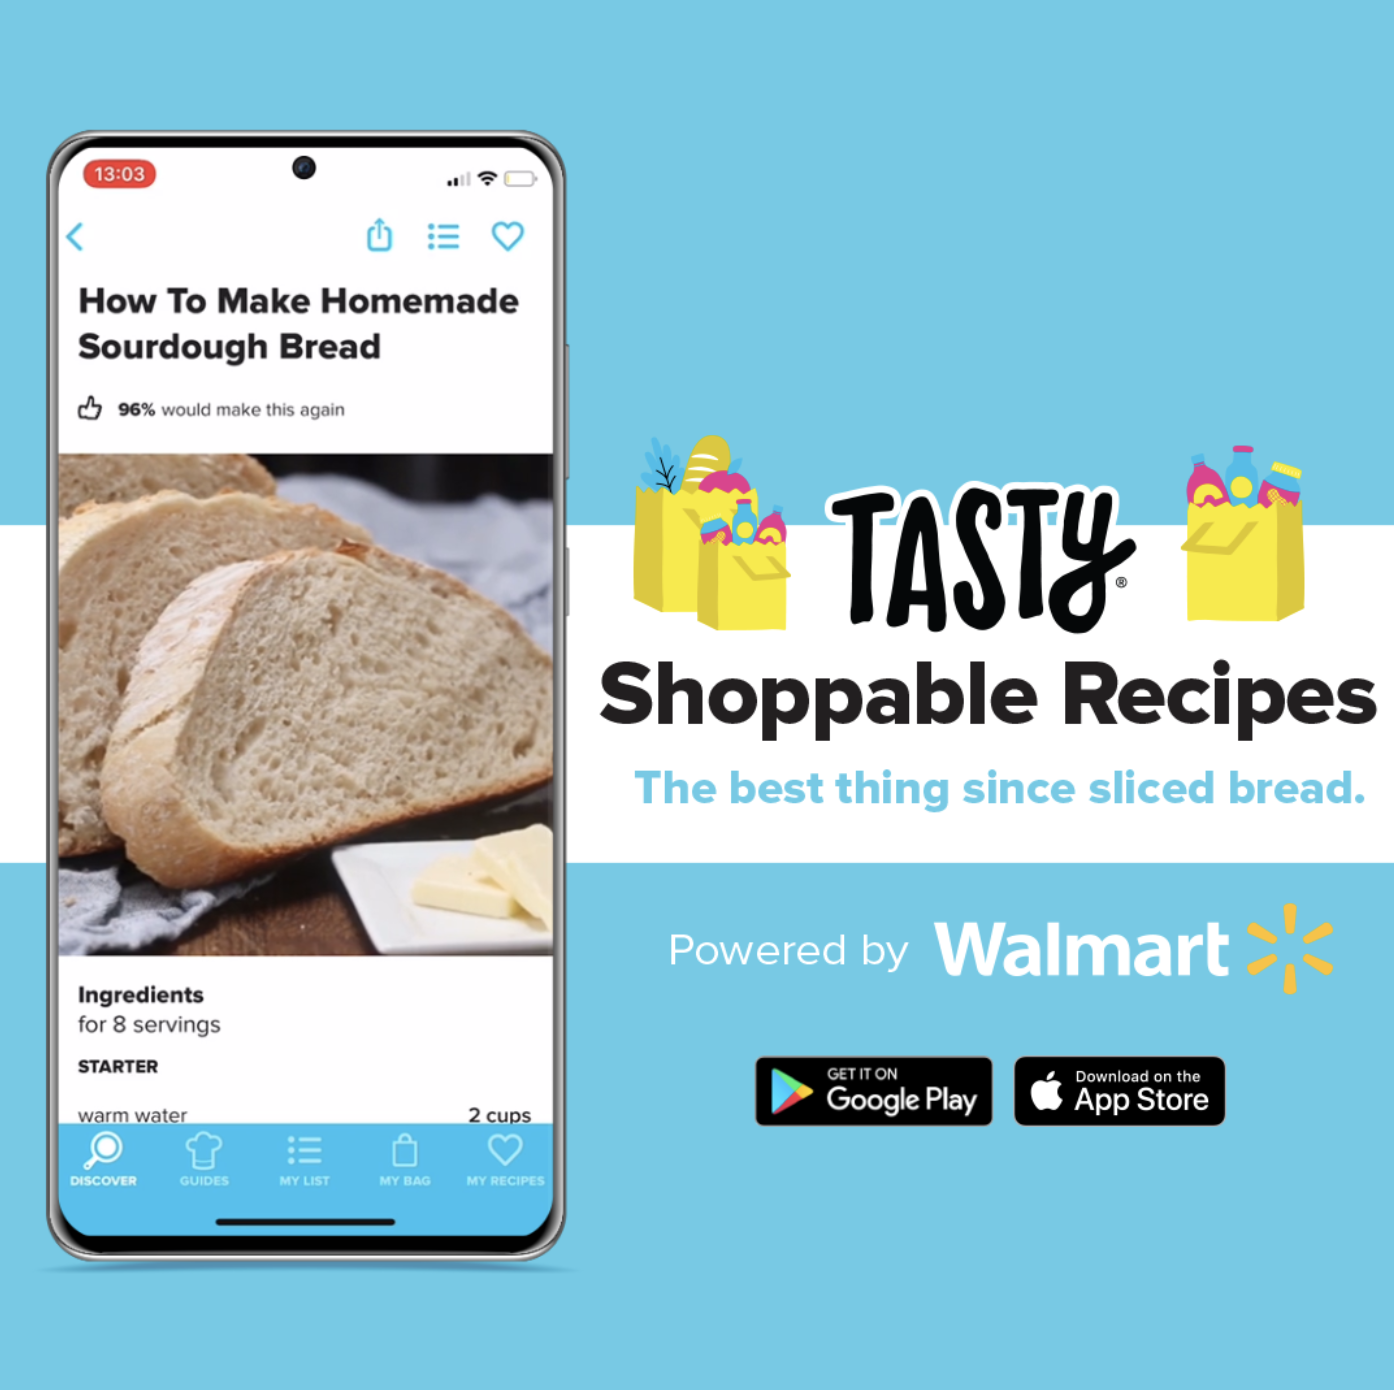 illustrated walmart/tasty banner showing a sourdough recipe on a phone